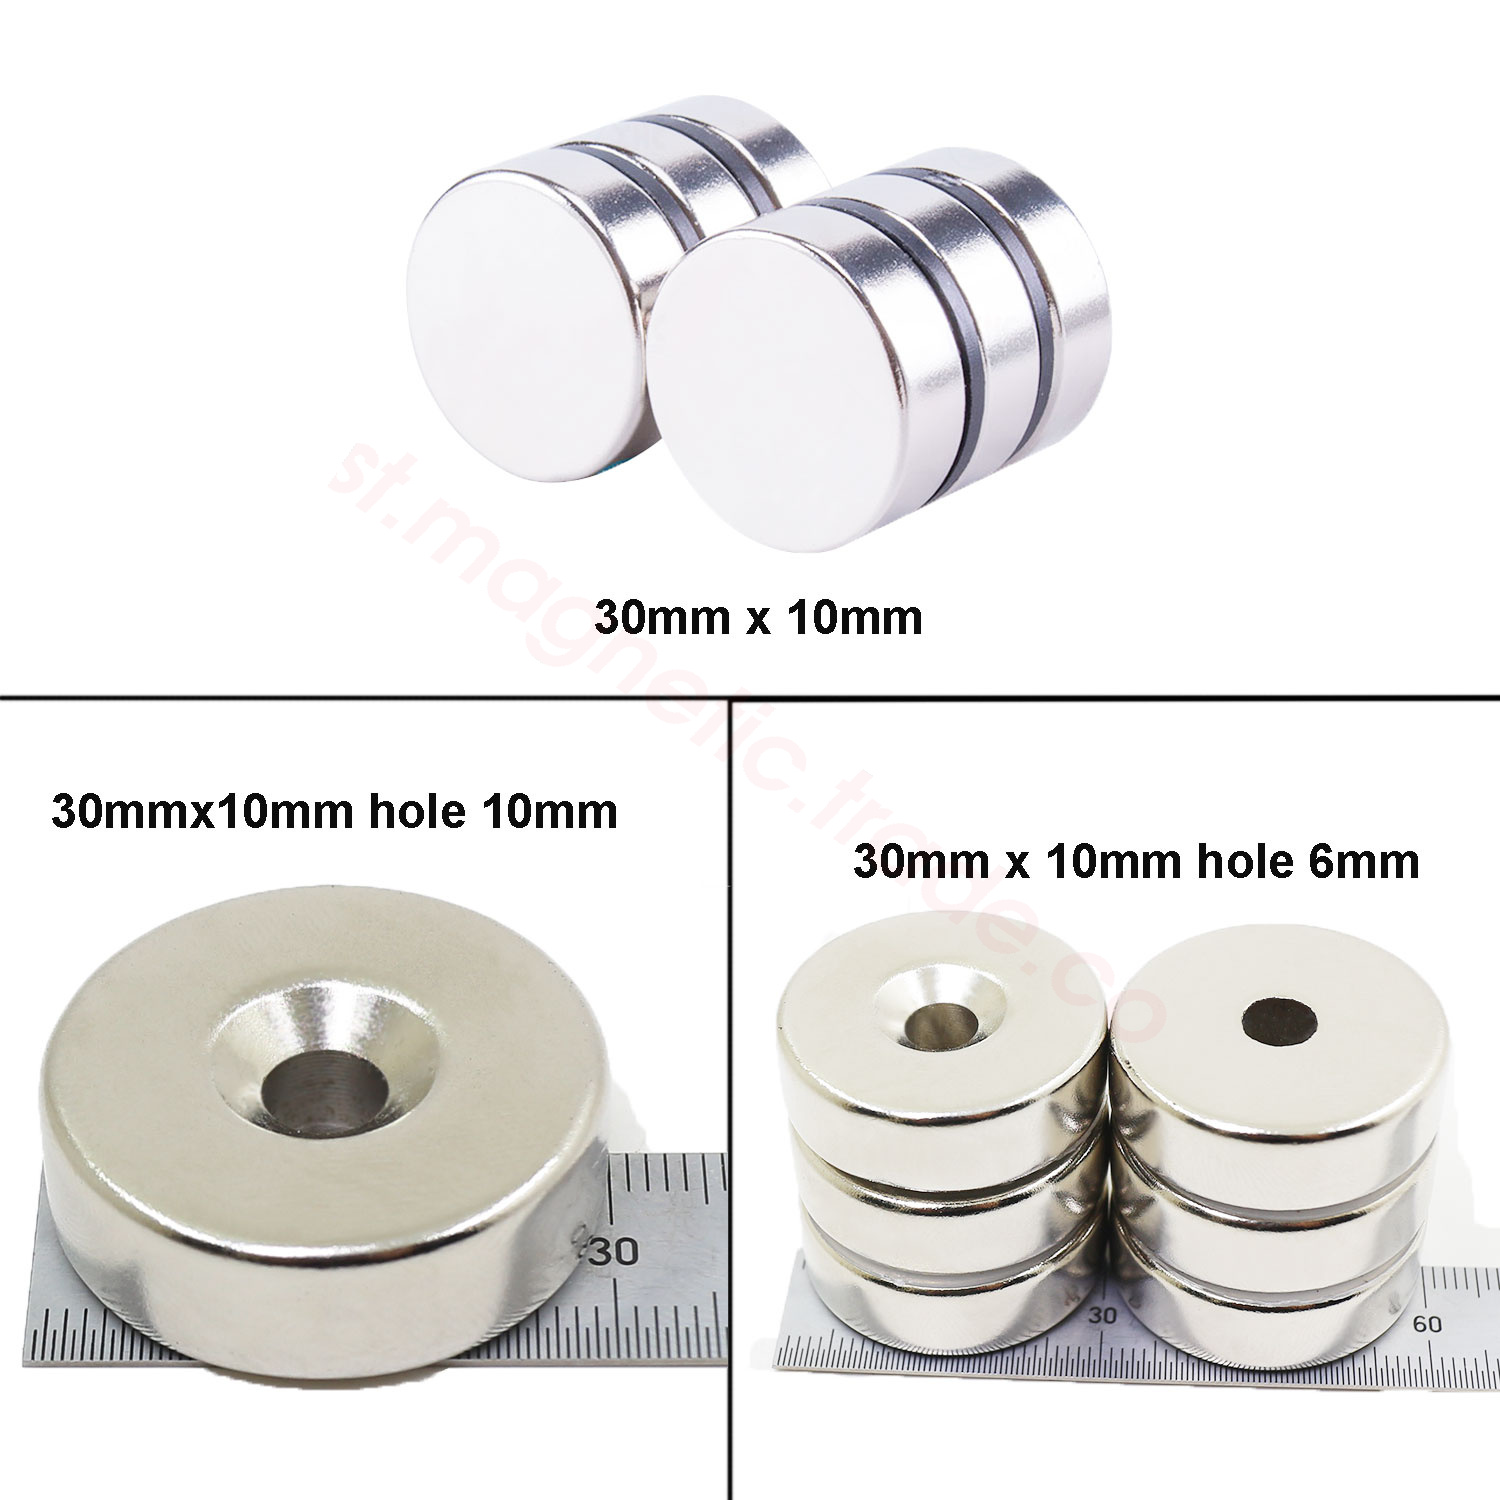 M5-0.8 Stainless Serrated Flange Lock Nut Spin Wiz Nuts M5x0.8 nut 5mm 5 